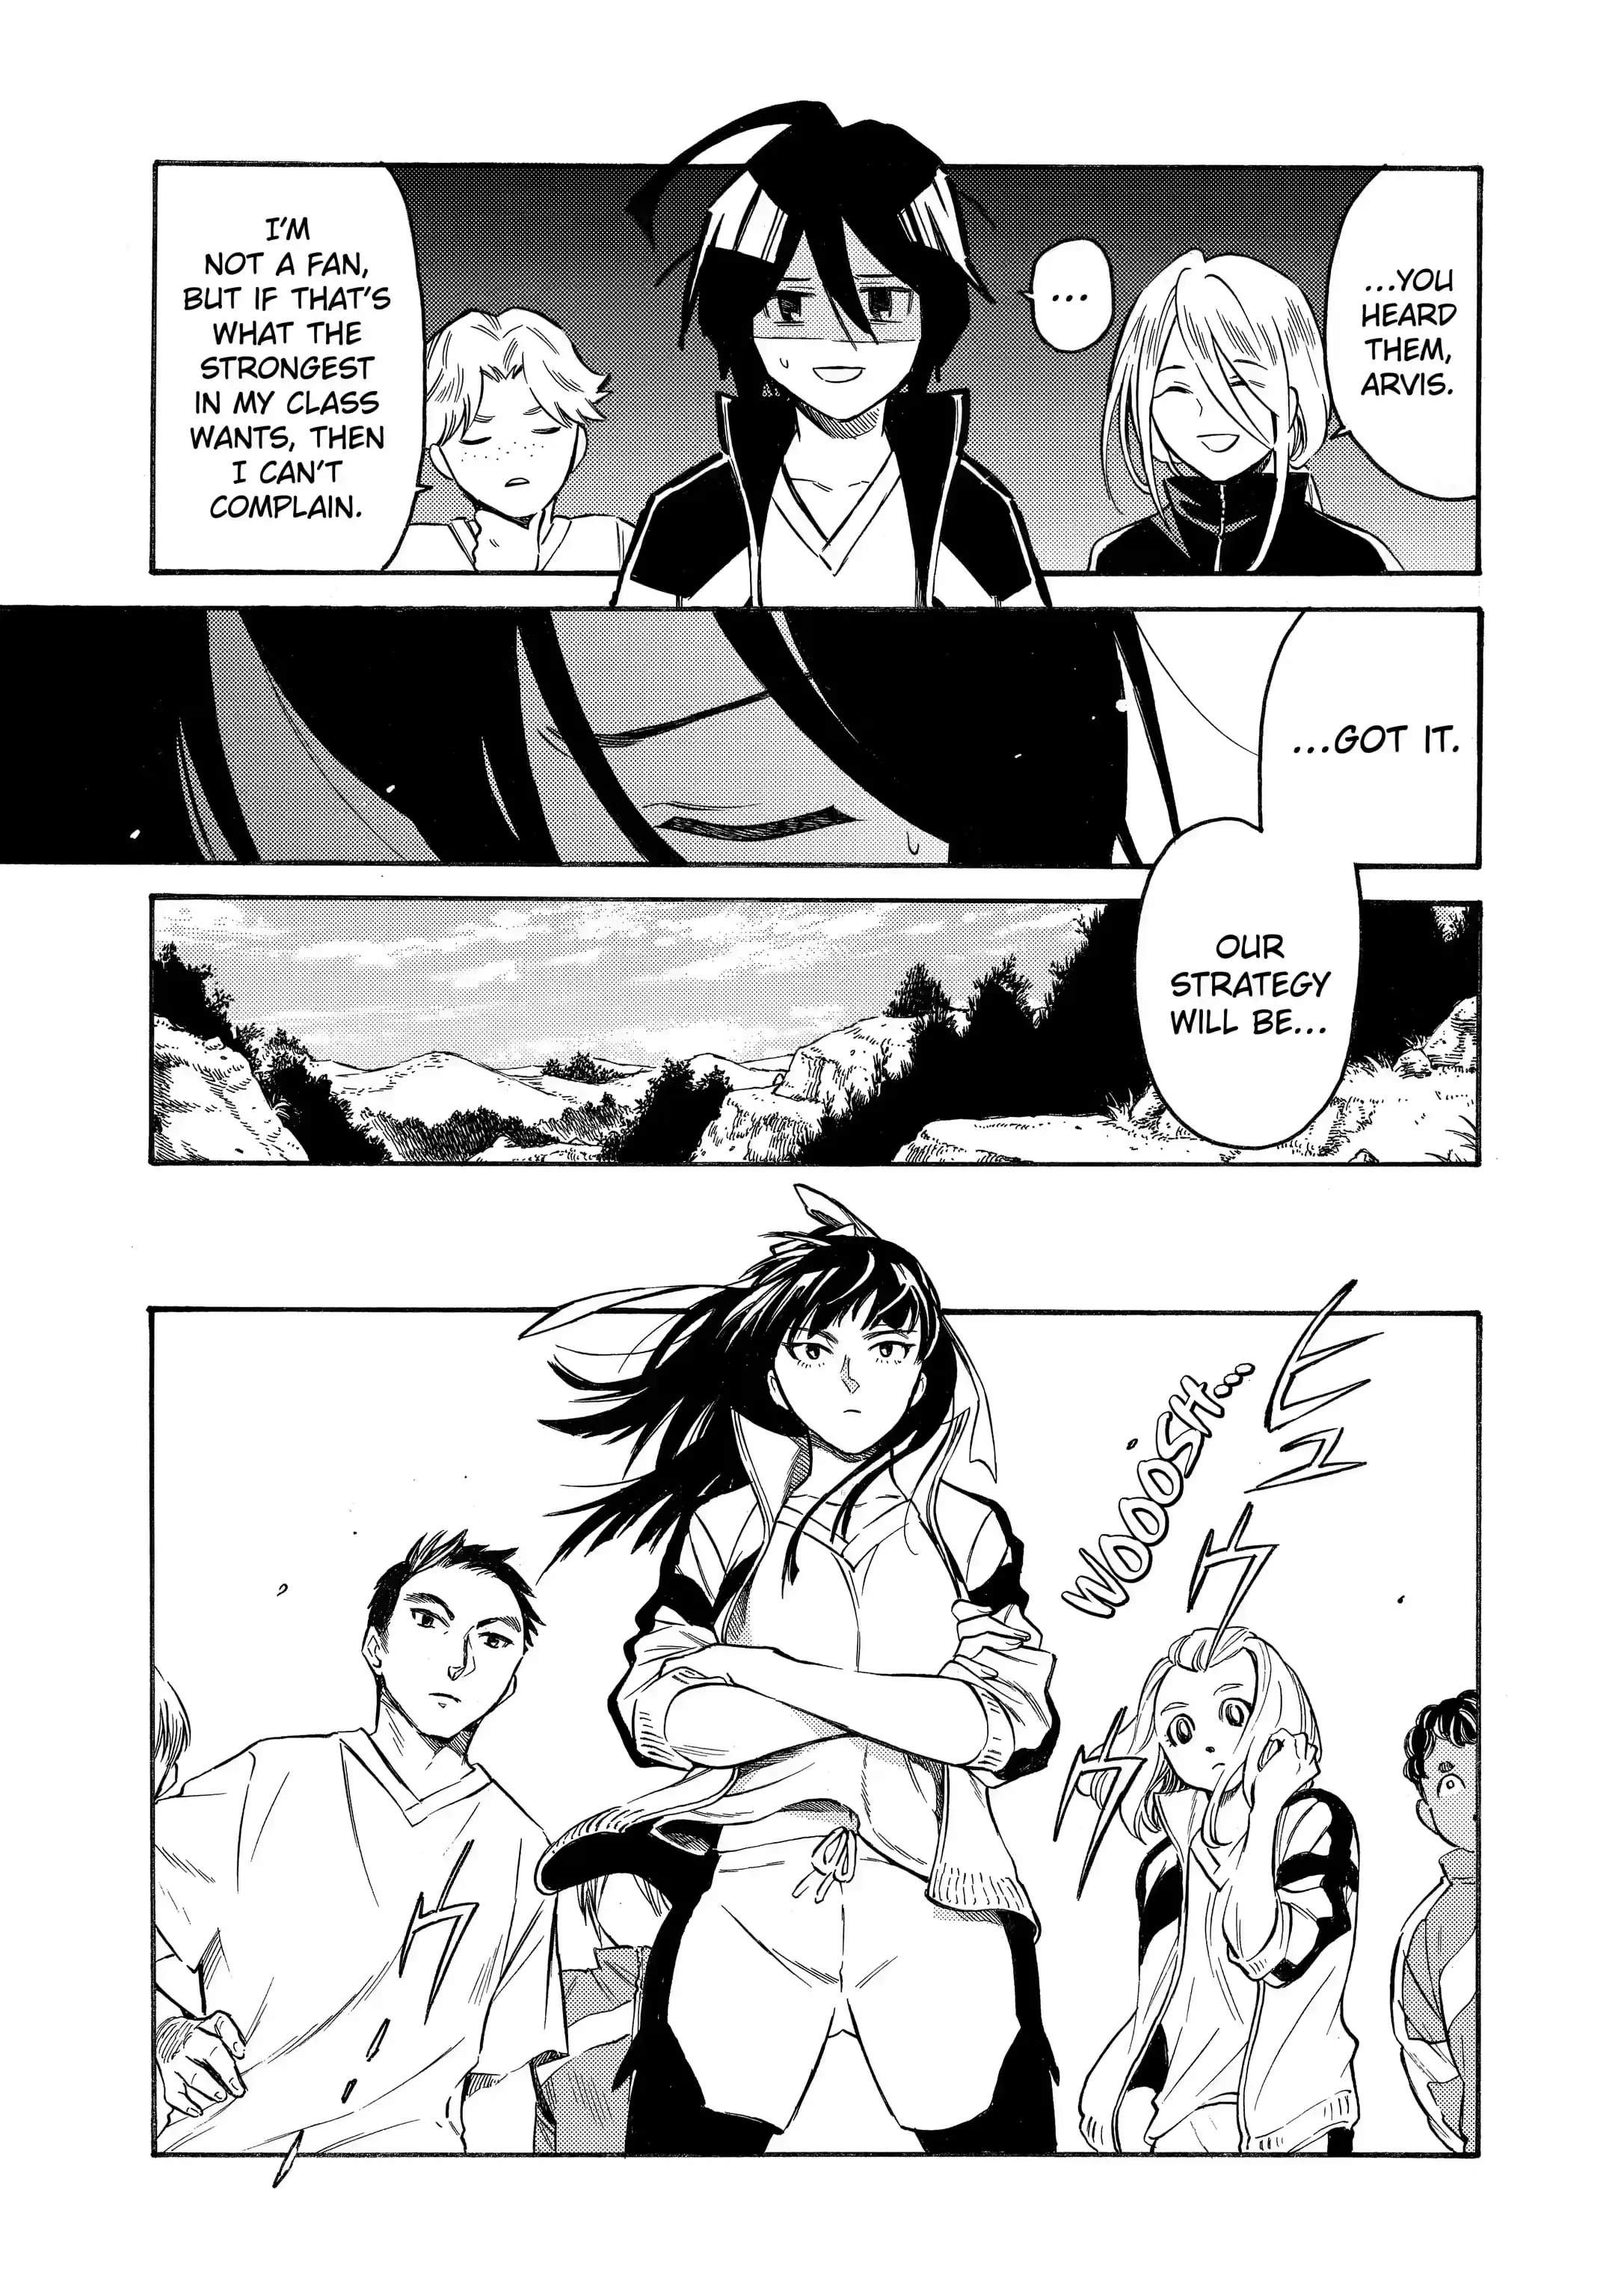 Reincarnation of the Unrivalled Time Mage: The Underachiever at the Magic Academy Turns Out to Be the Strongest Mage Who Controls Time! Chapter 12.1-eng-li - Page 11